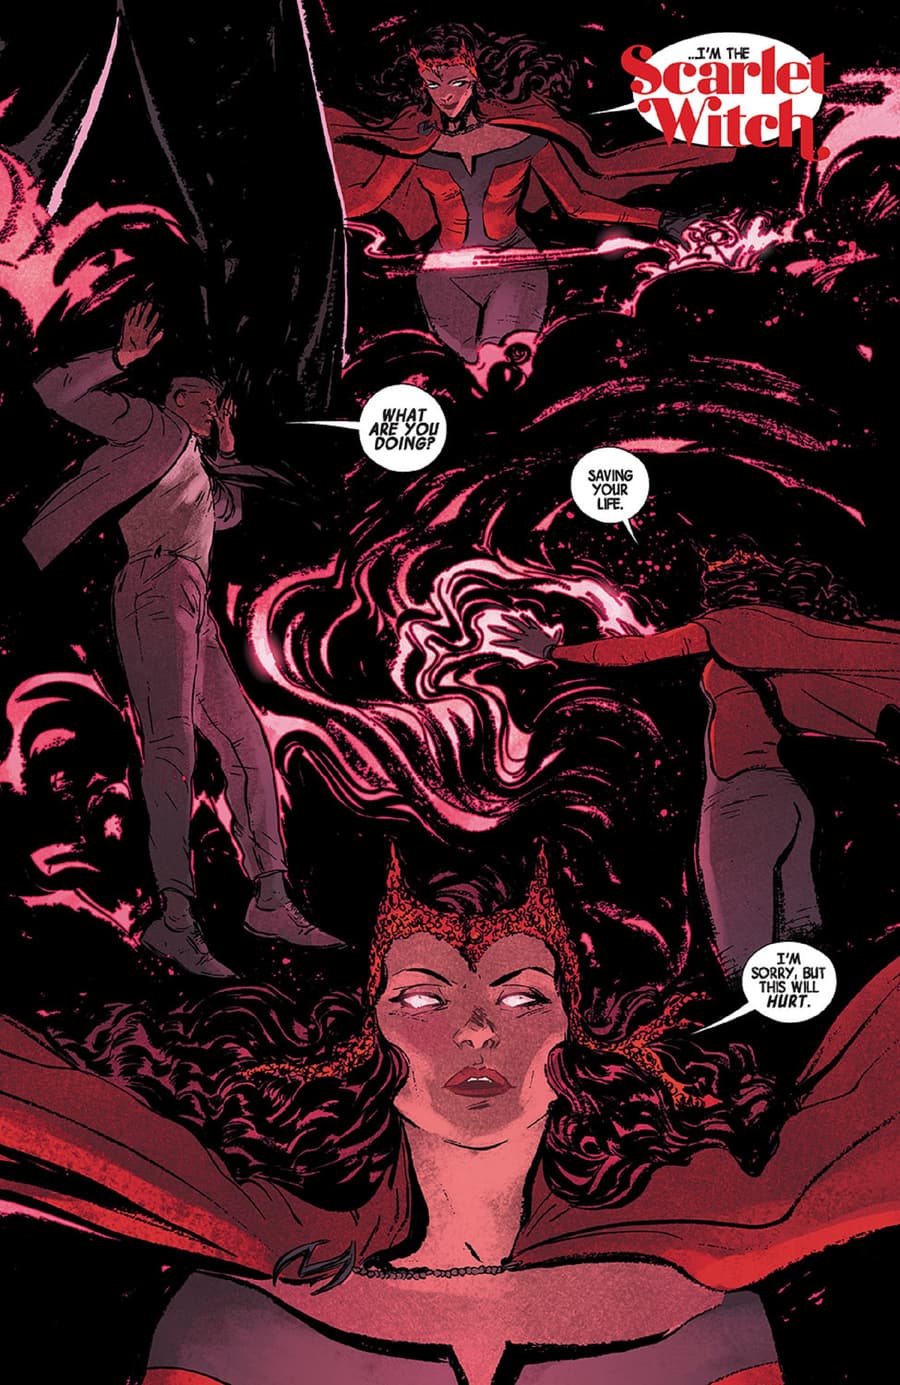 Scarlet Witch exorcises a demon.